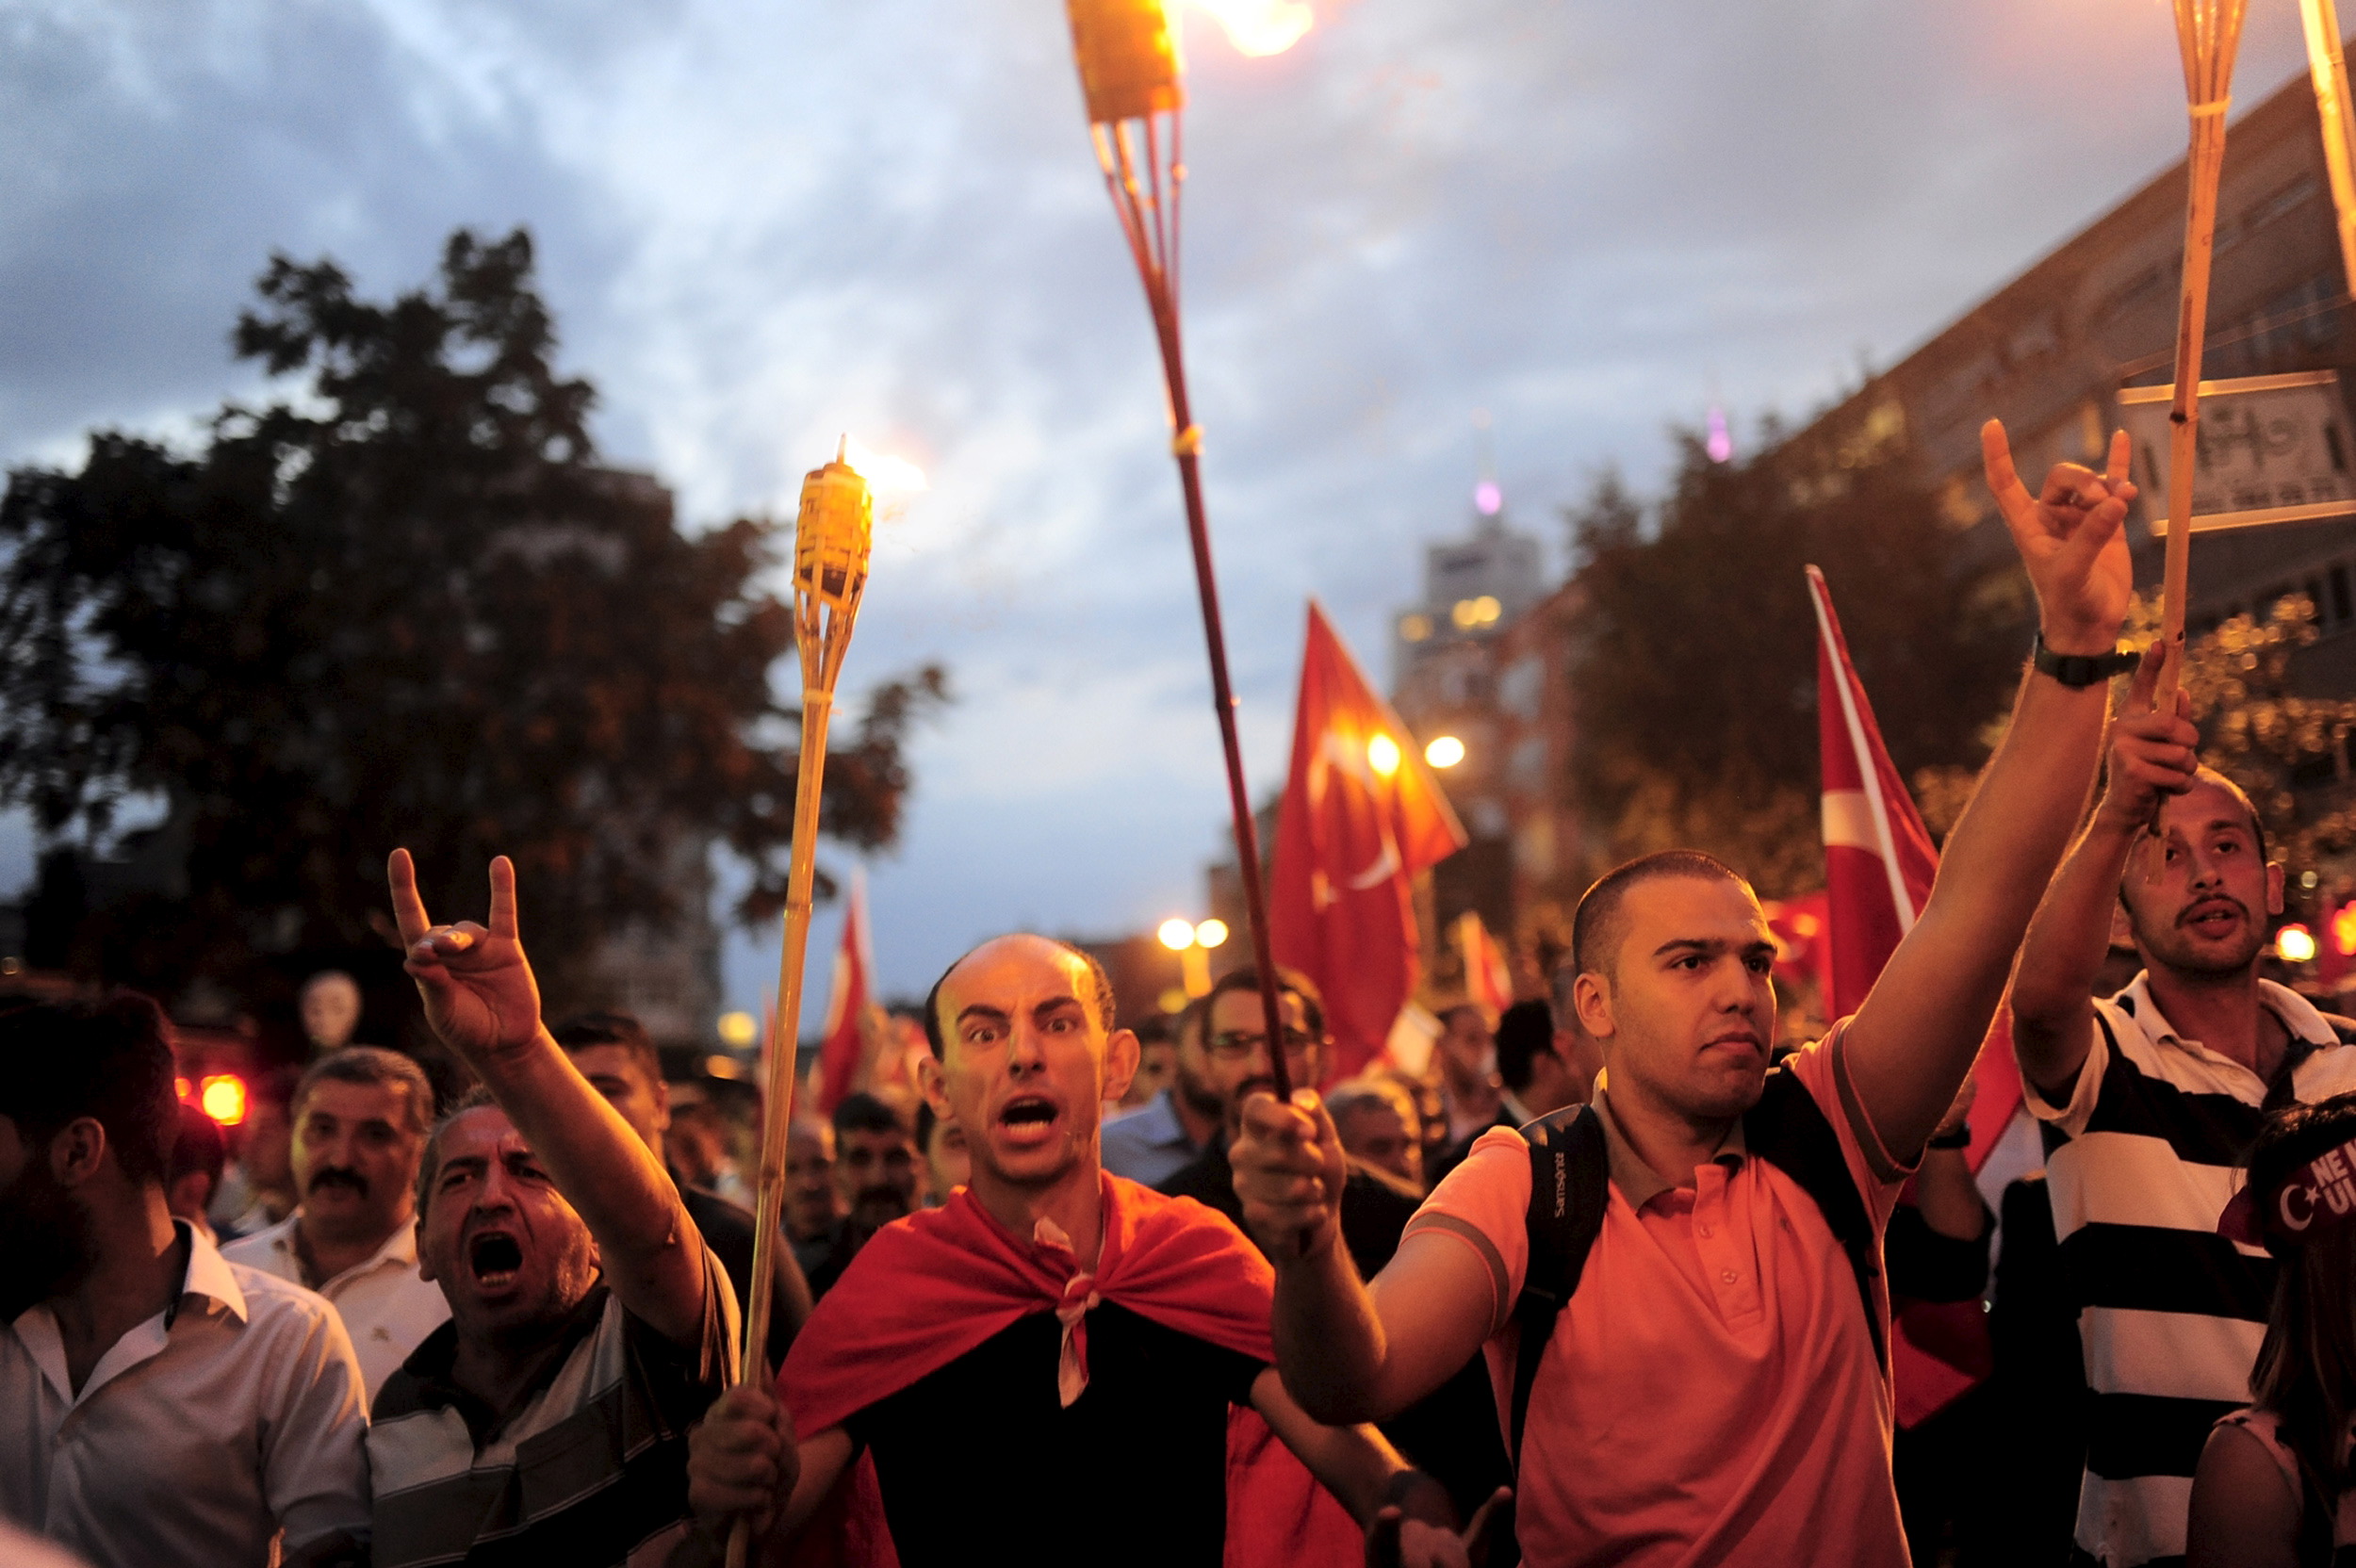 Supporters of ultra-nationalist groups shout slogans during a protest against recent Kurdish militant attacks on Turkish security forces, in Istanbul, Turkey